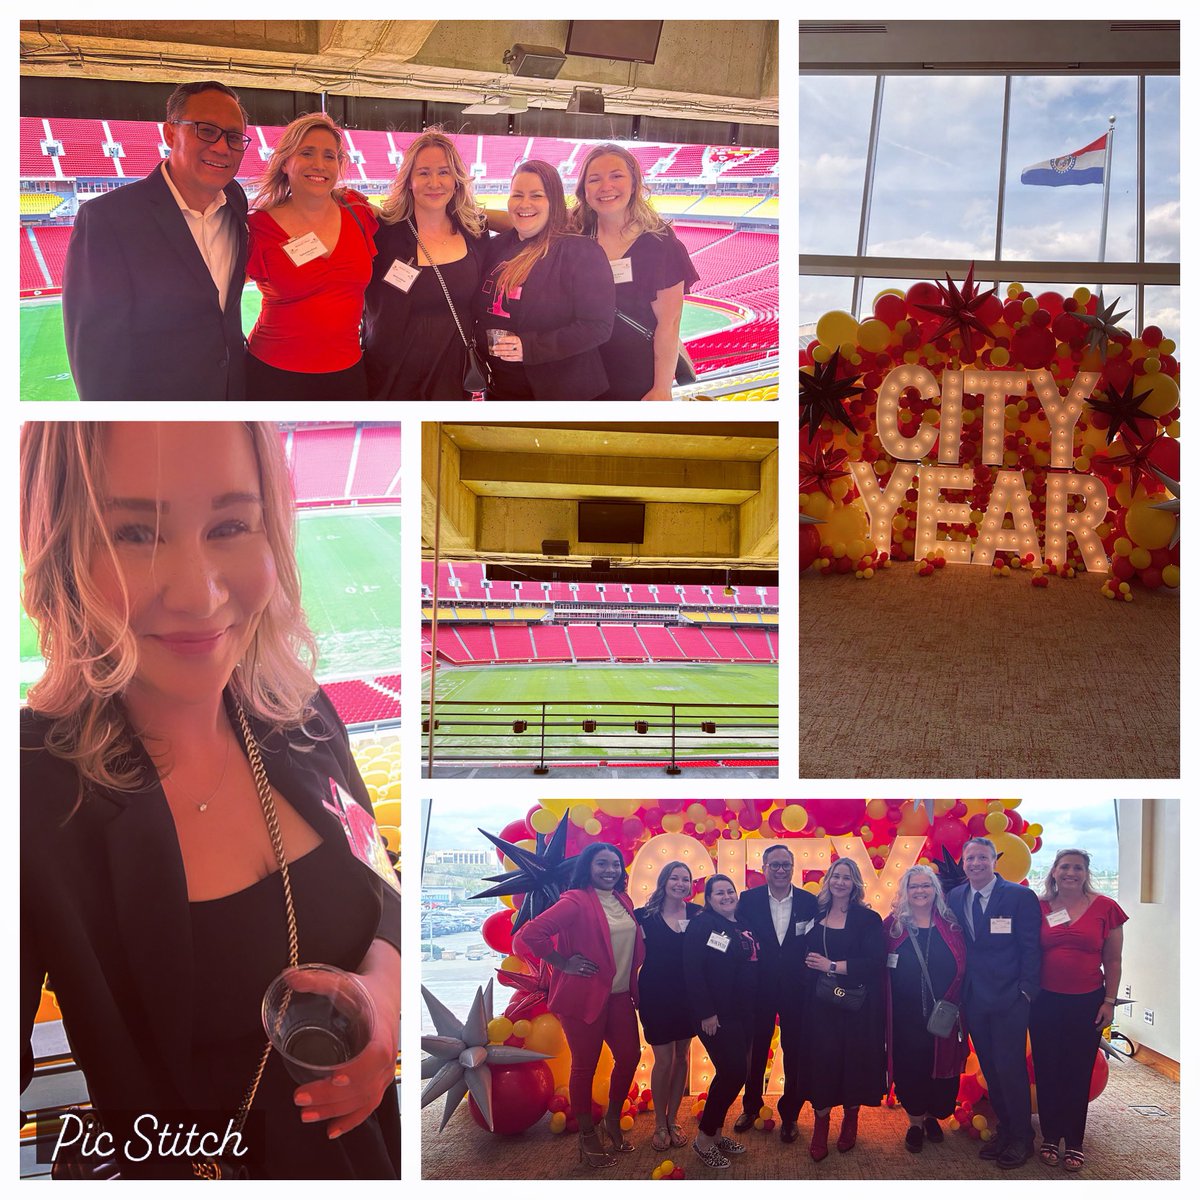 Thanks @CityYearKC for an lovely evening! Loved being able to support the Kansas City 💛❤️ community! Great #MagentaGivingMonth moment with friends! @FruitWeasel13 @mirandajostark @boone712